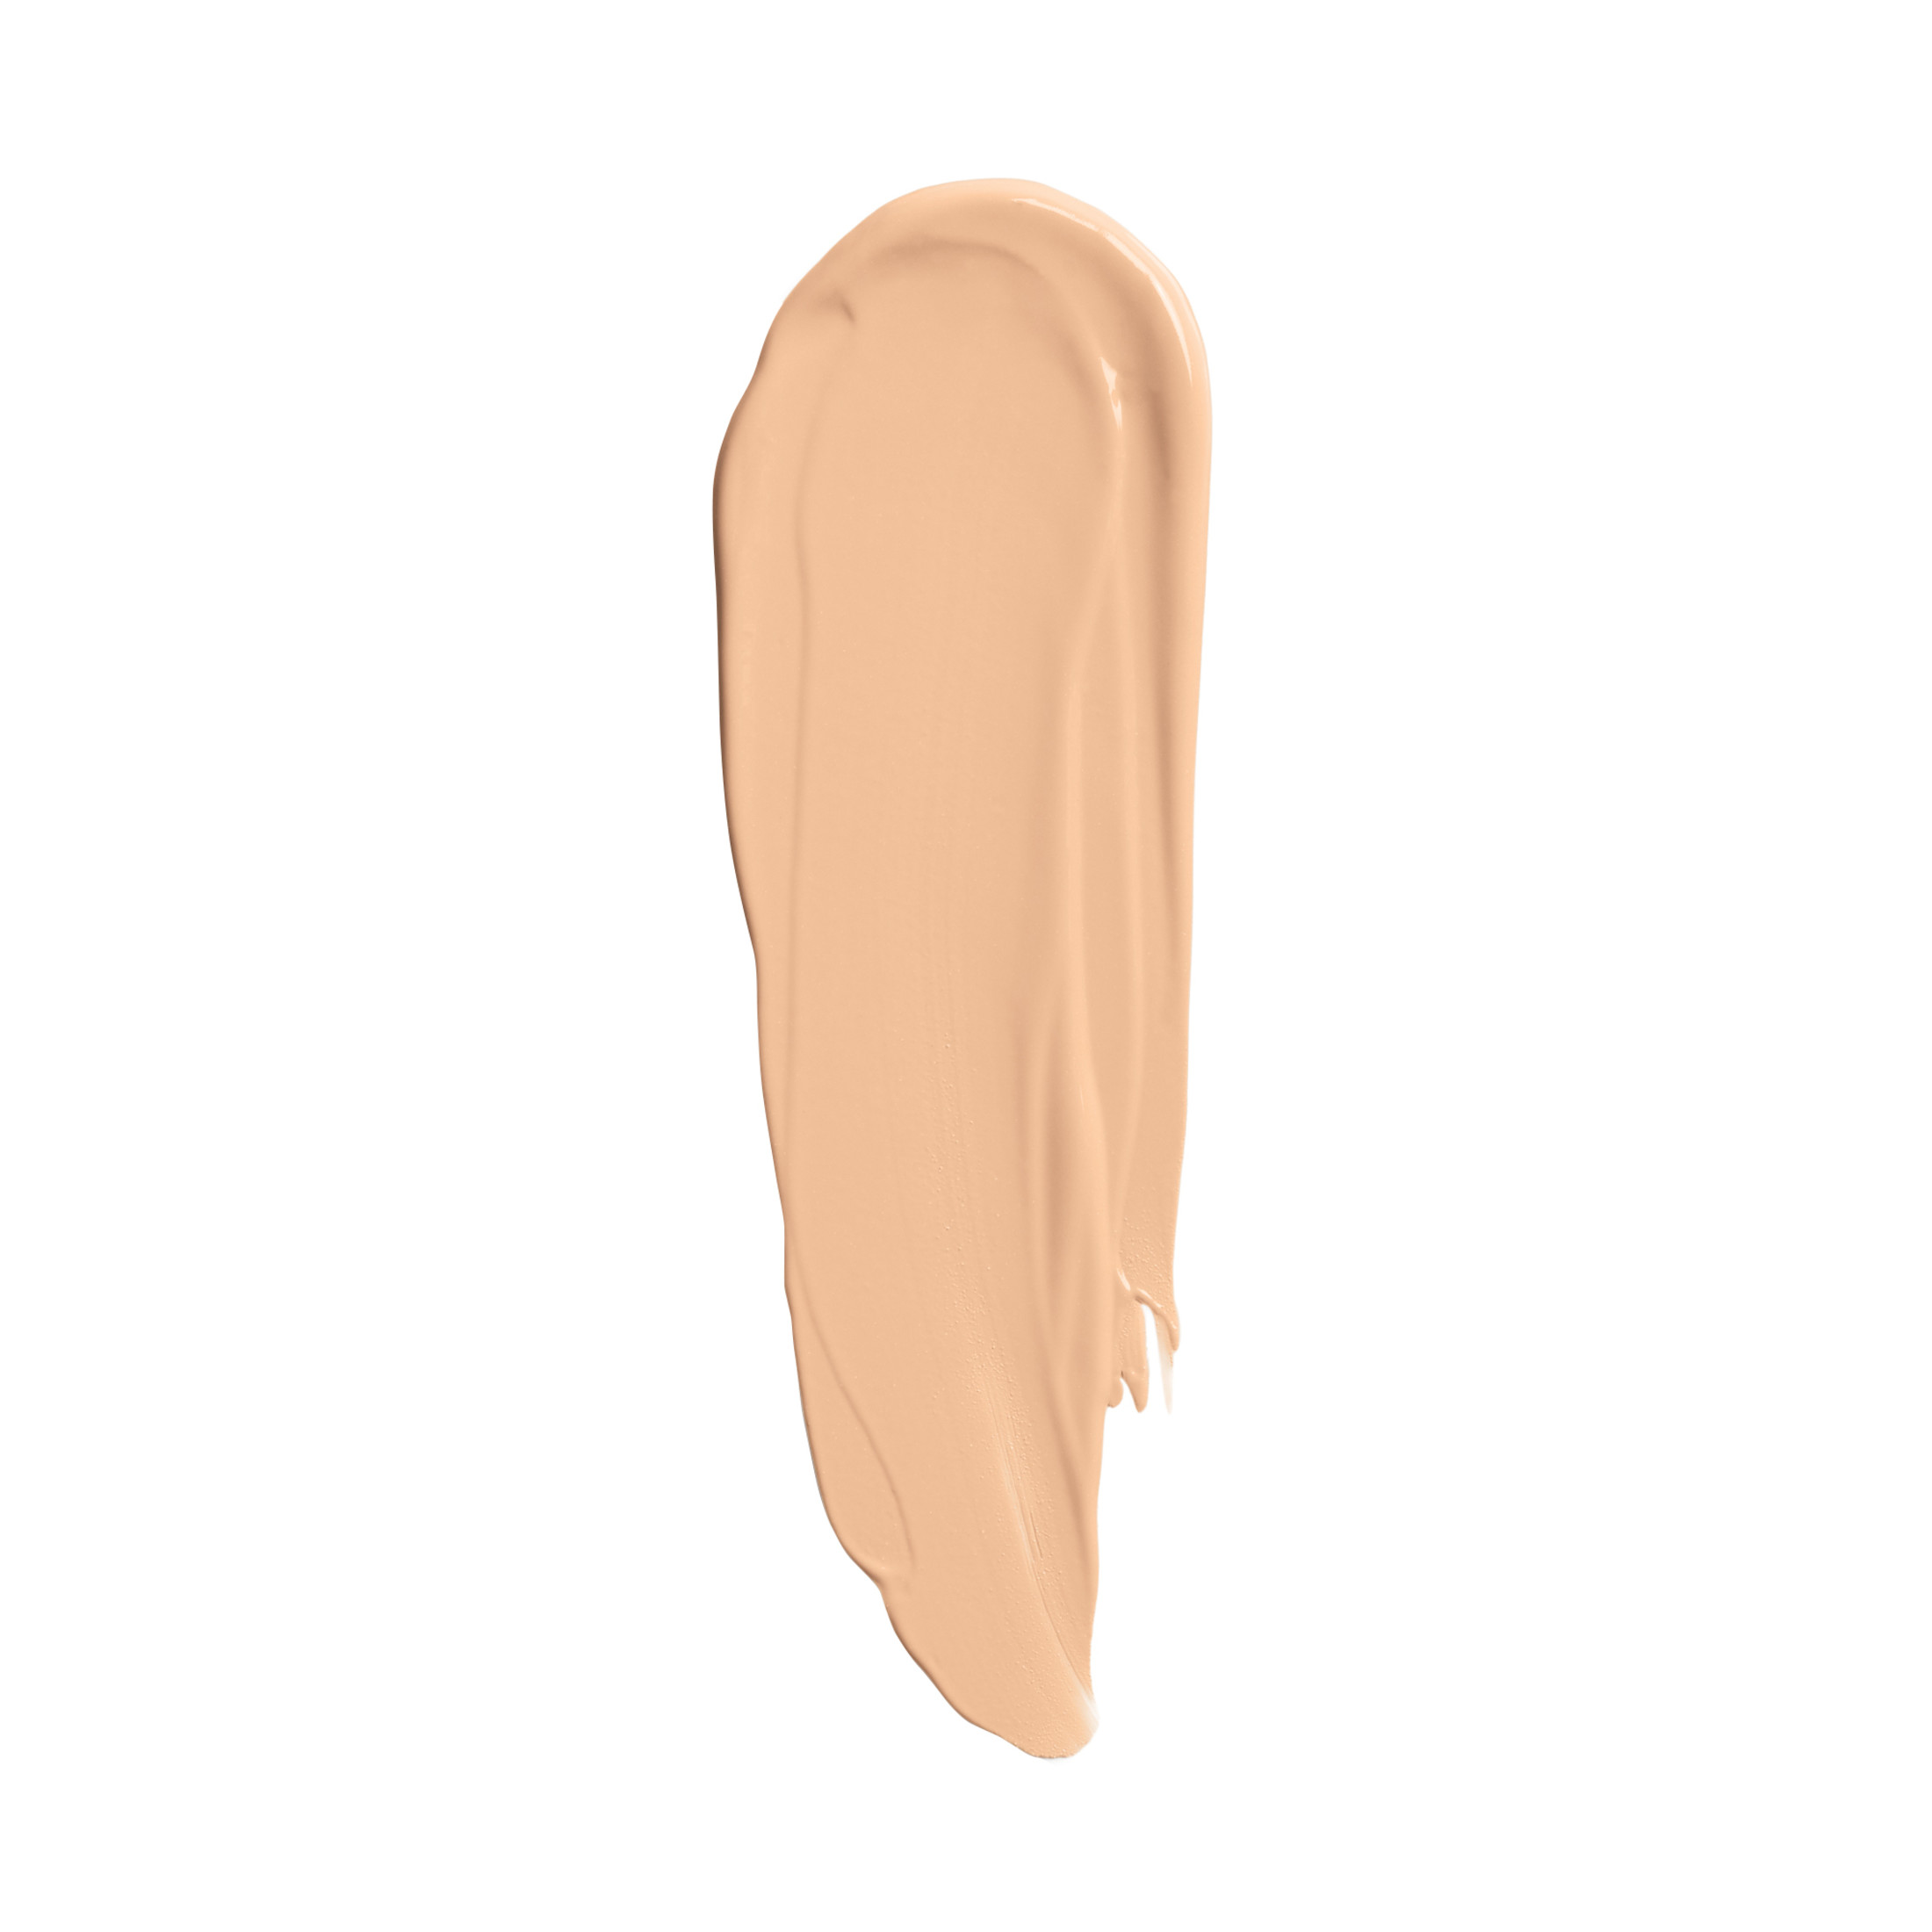 COVERGIRL Outlast All-Day Stay Fabulous 3-in-1 Foundation, 820 Creamy Natural - image 5 of 11